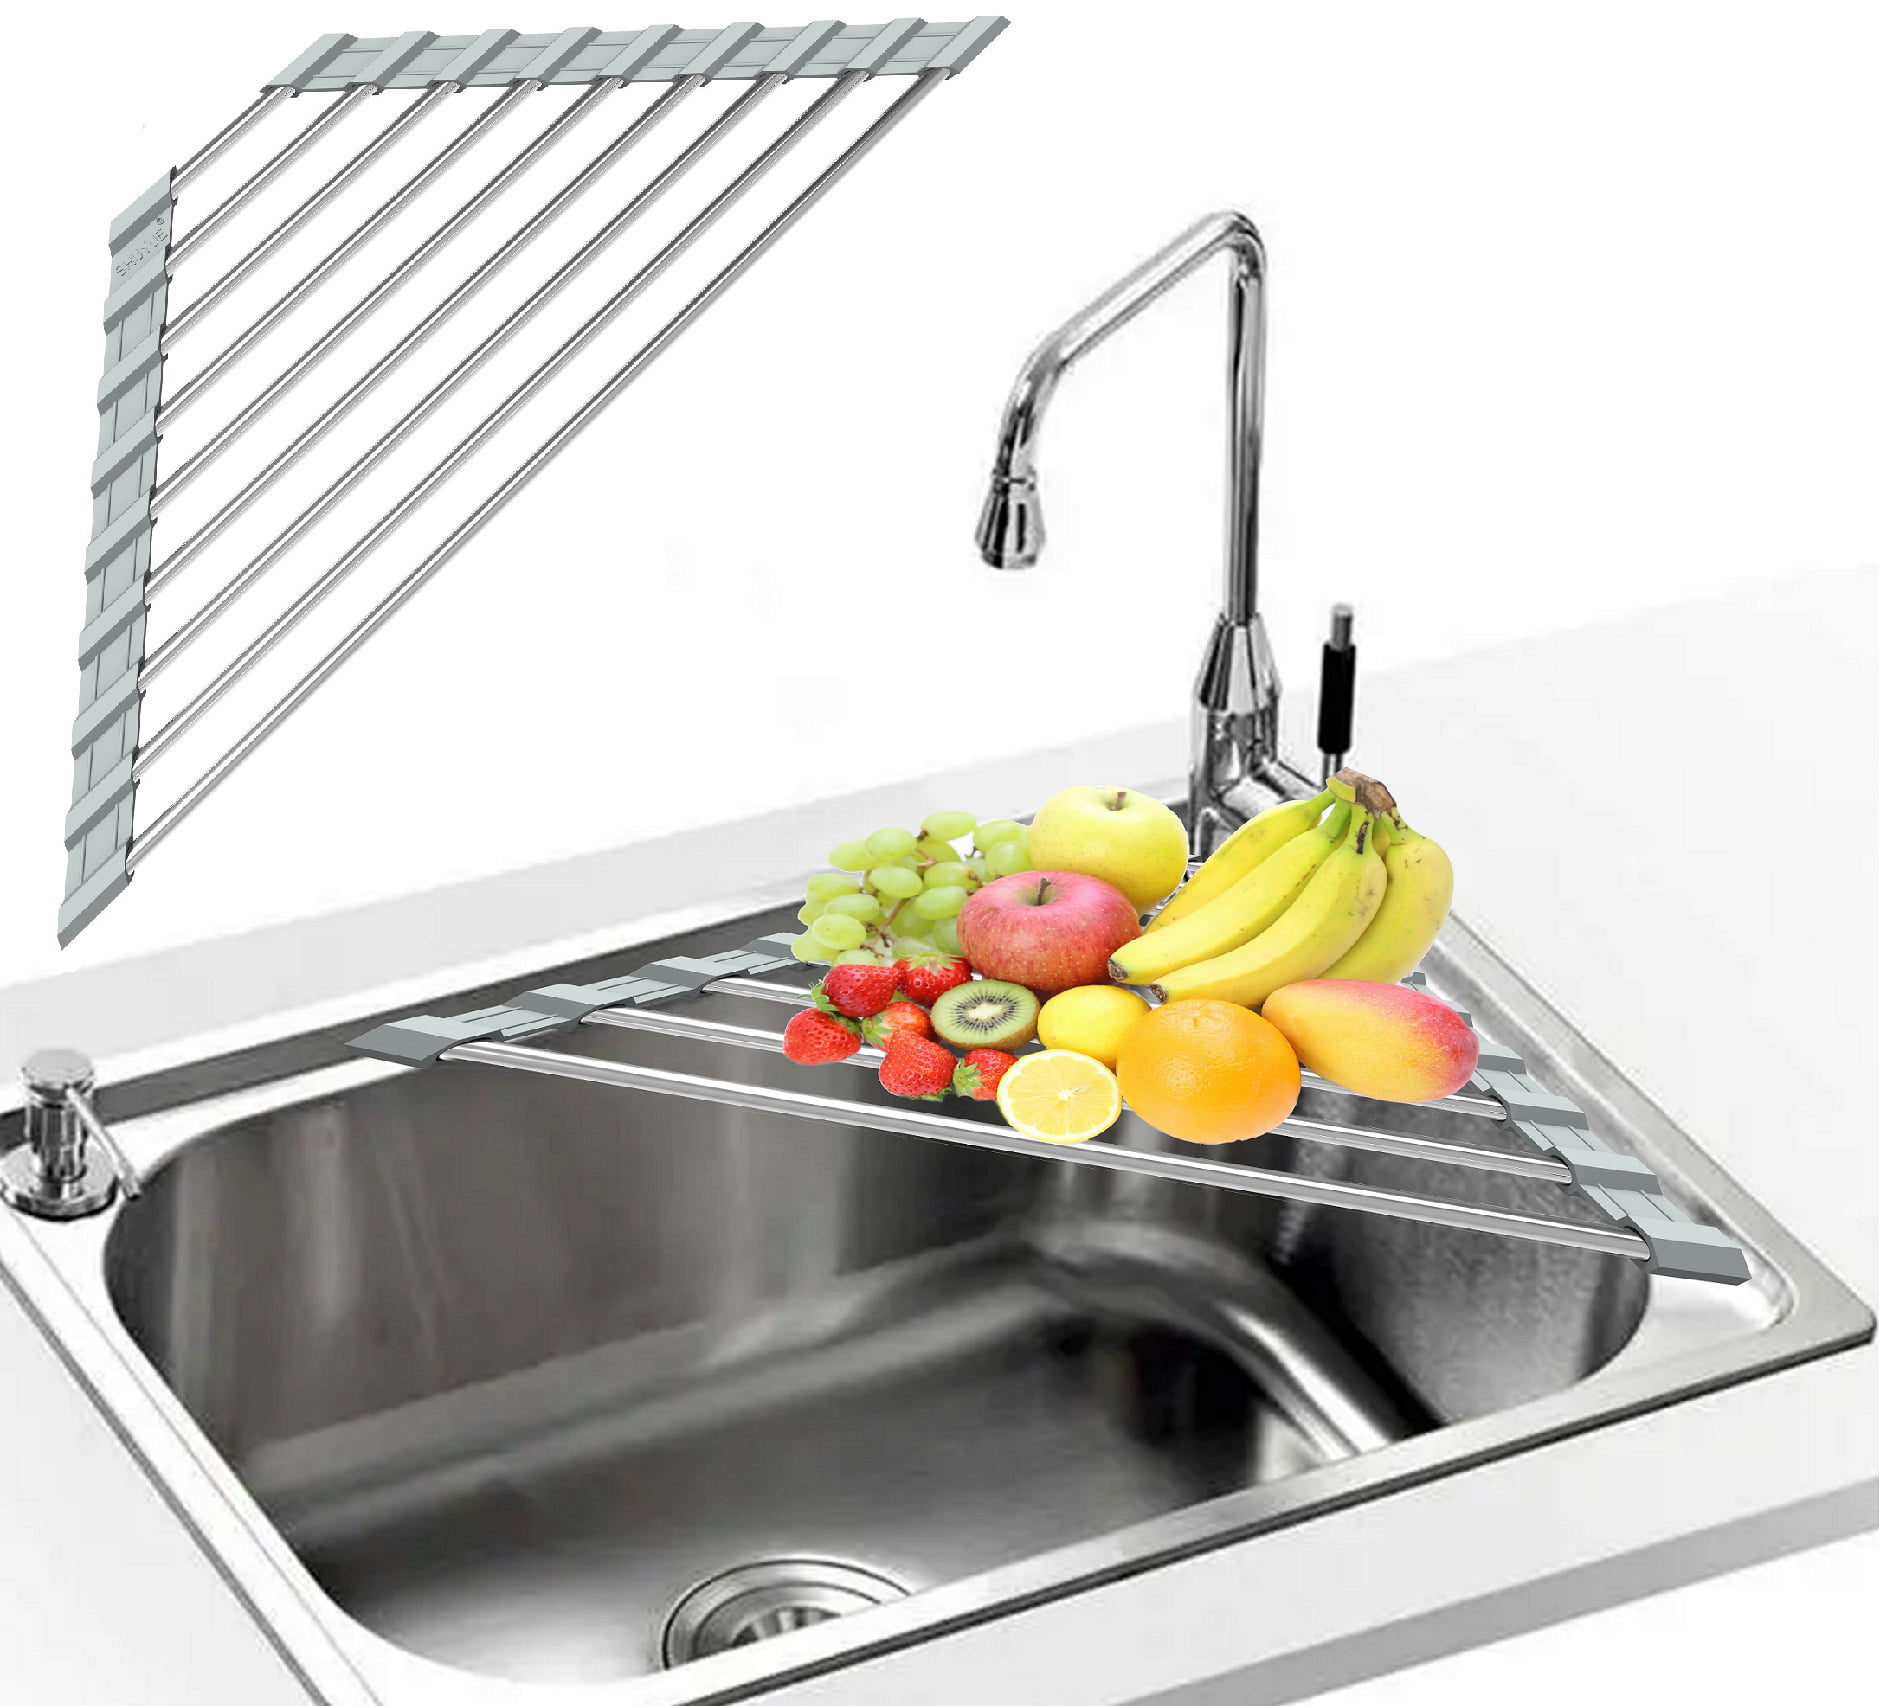 Tomorotec Triangle Roll-Up Dish Drying Rack for Sink Corner Small Foldable Stainless Steel Over The Sink Multipurpose Kitchen